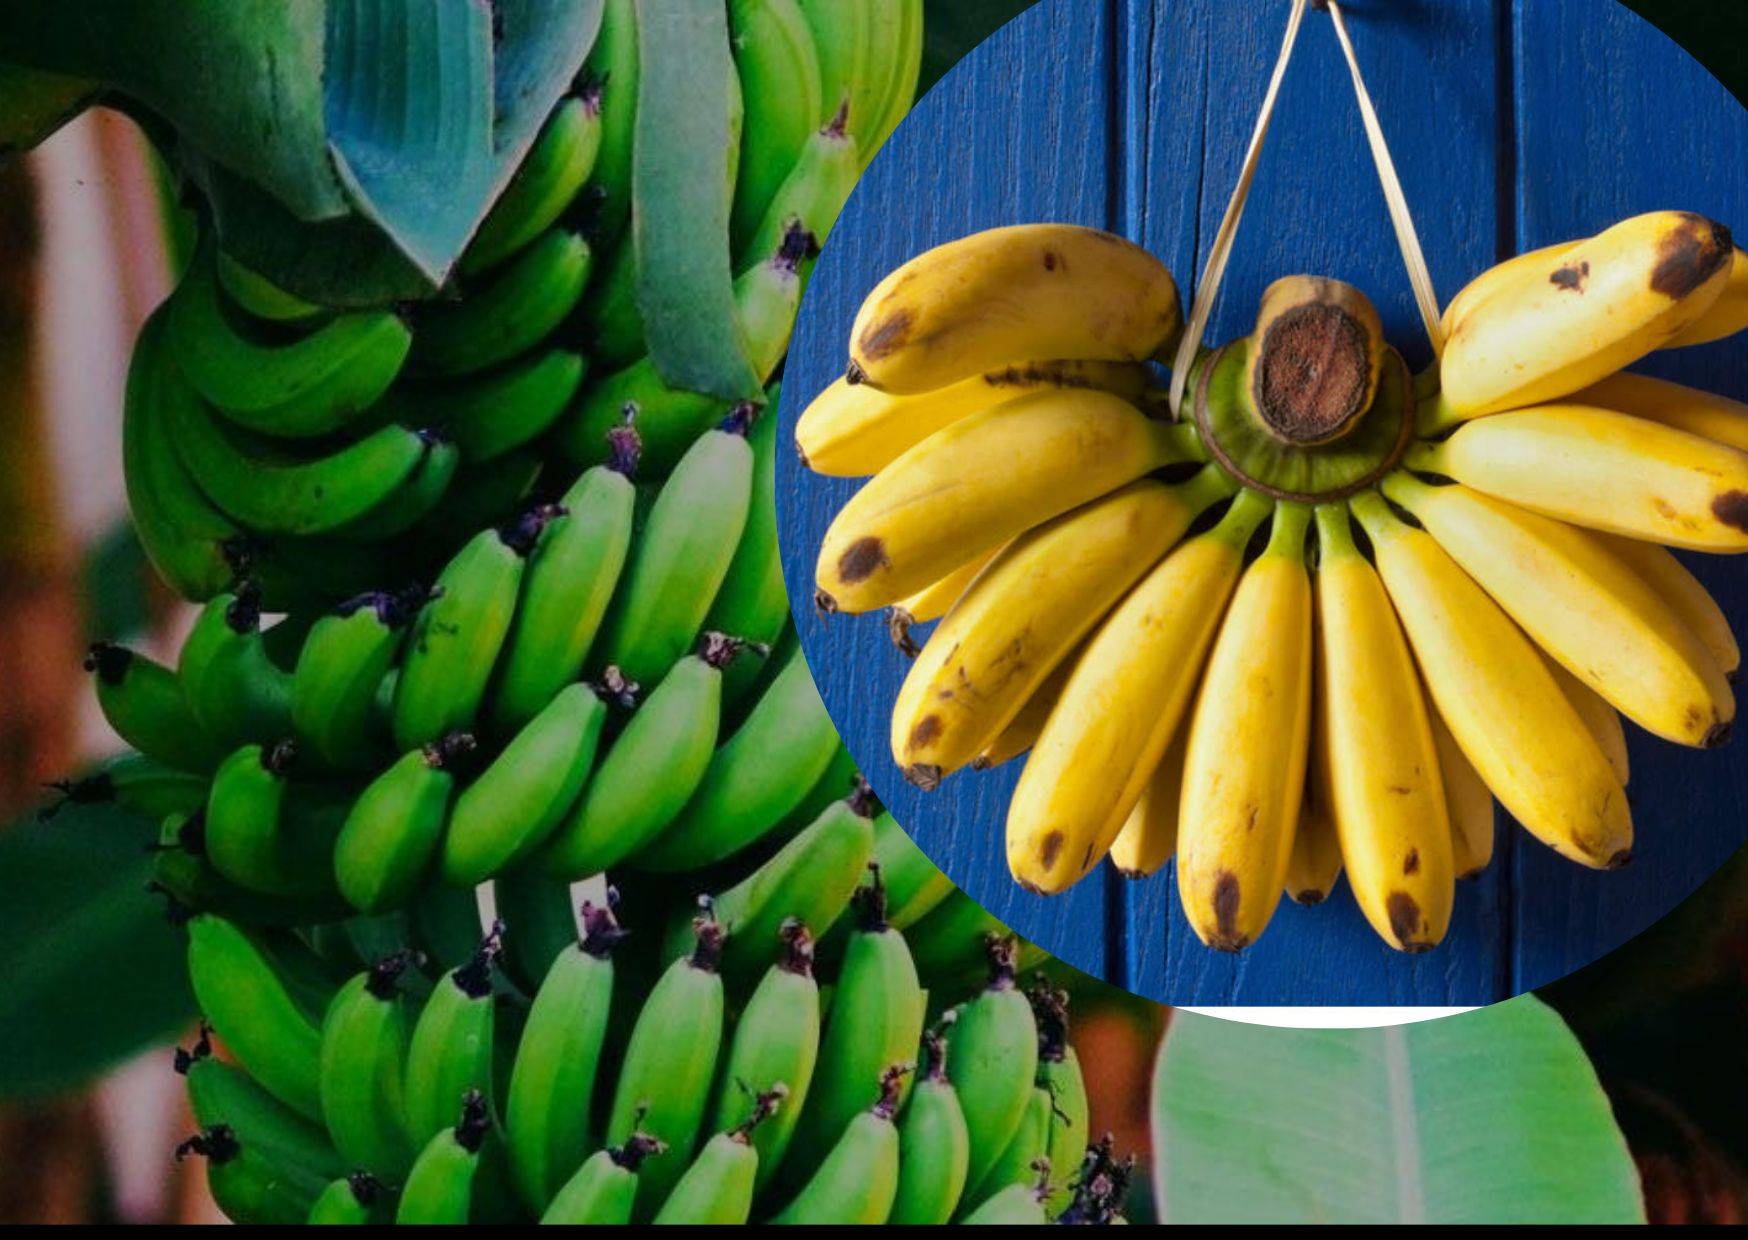 India is the largest producer of bananas, now Occupying space in global market